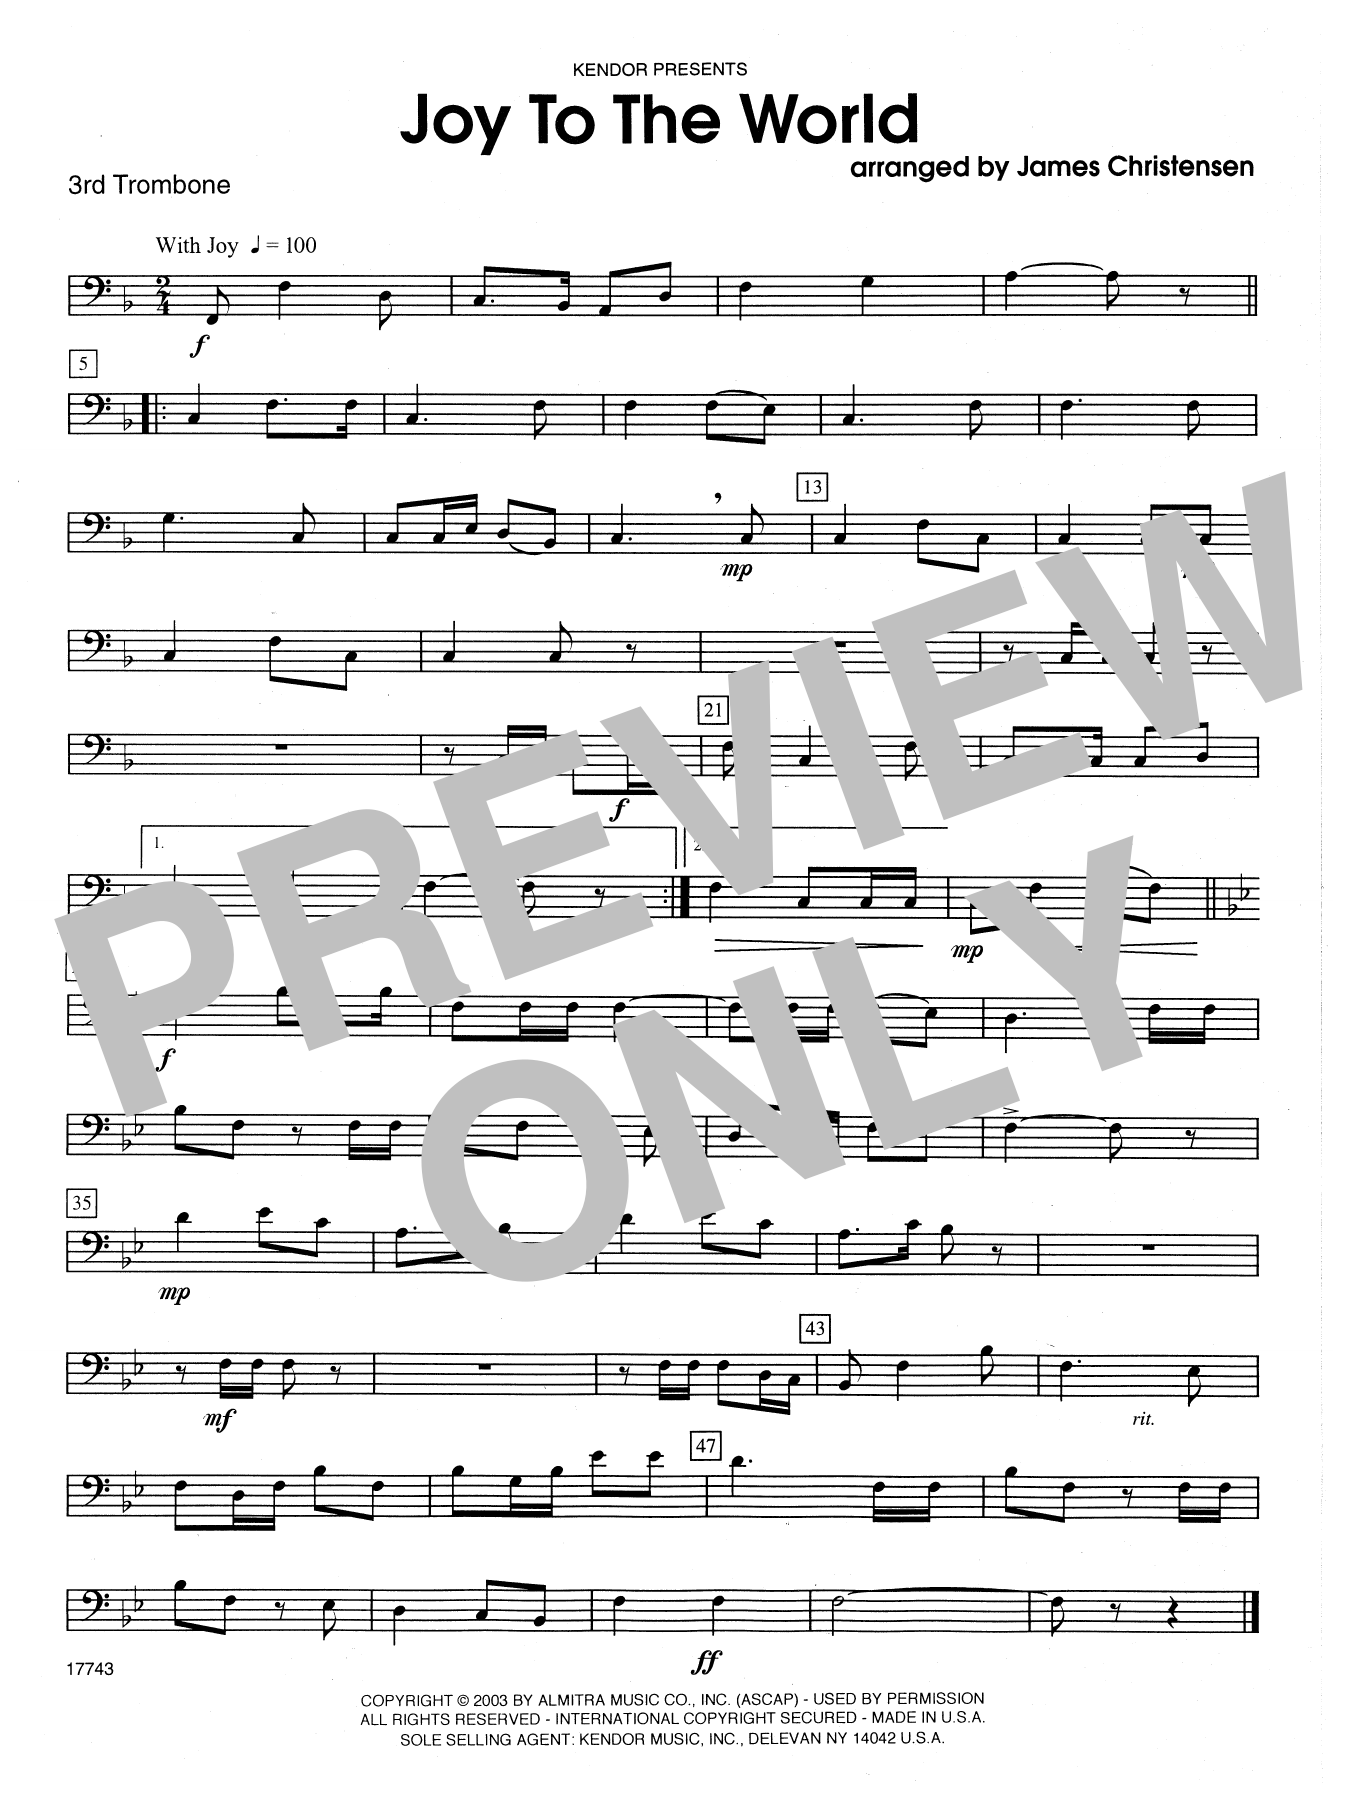 James Christensen Joy to the World - 3rd Trombone sheet music notes and chords. Download Printable PDF.